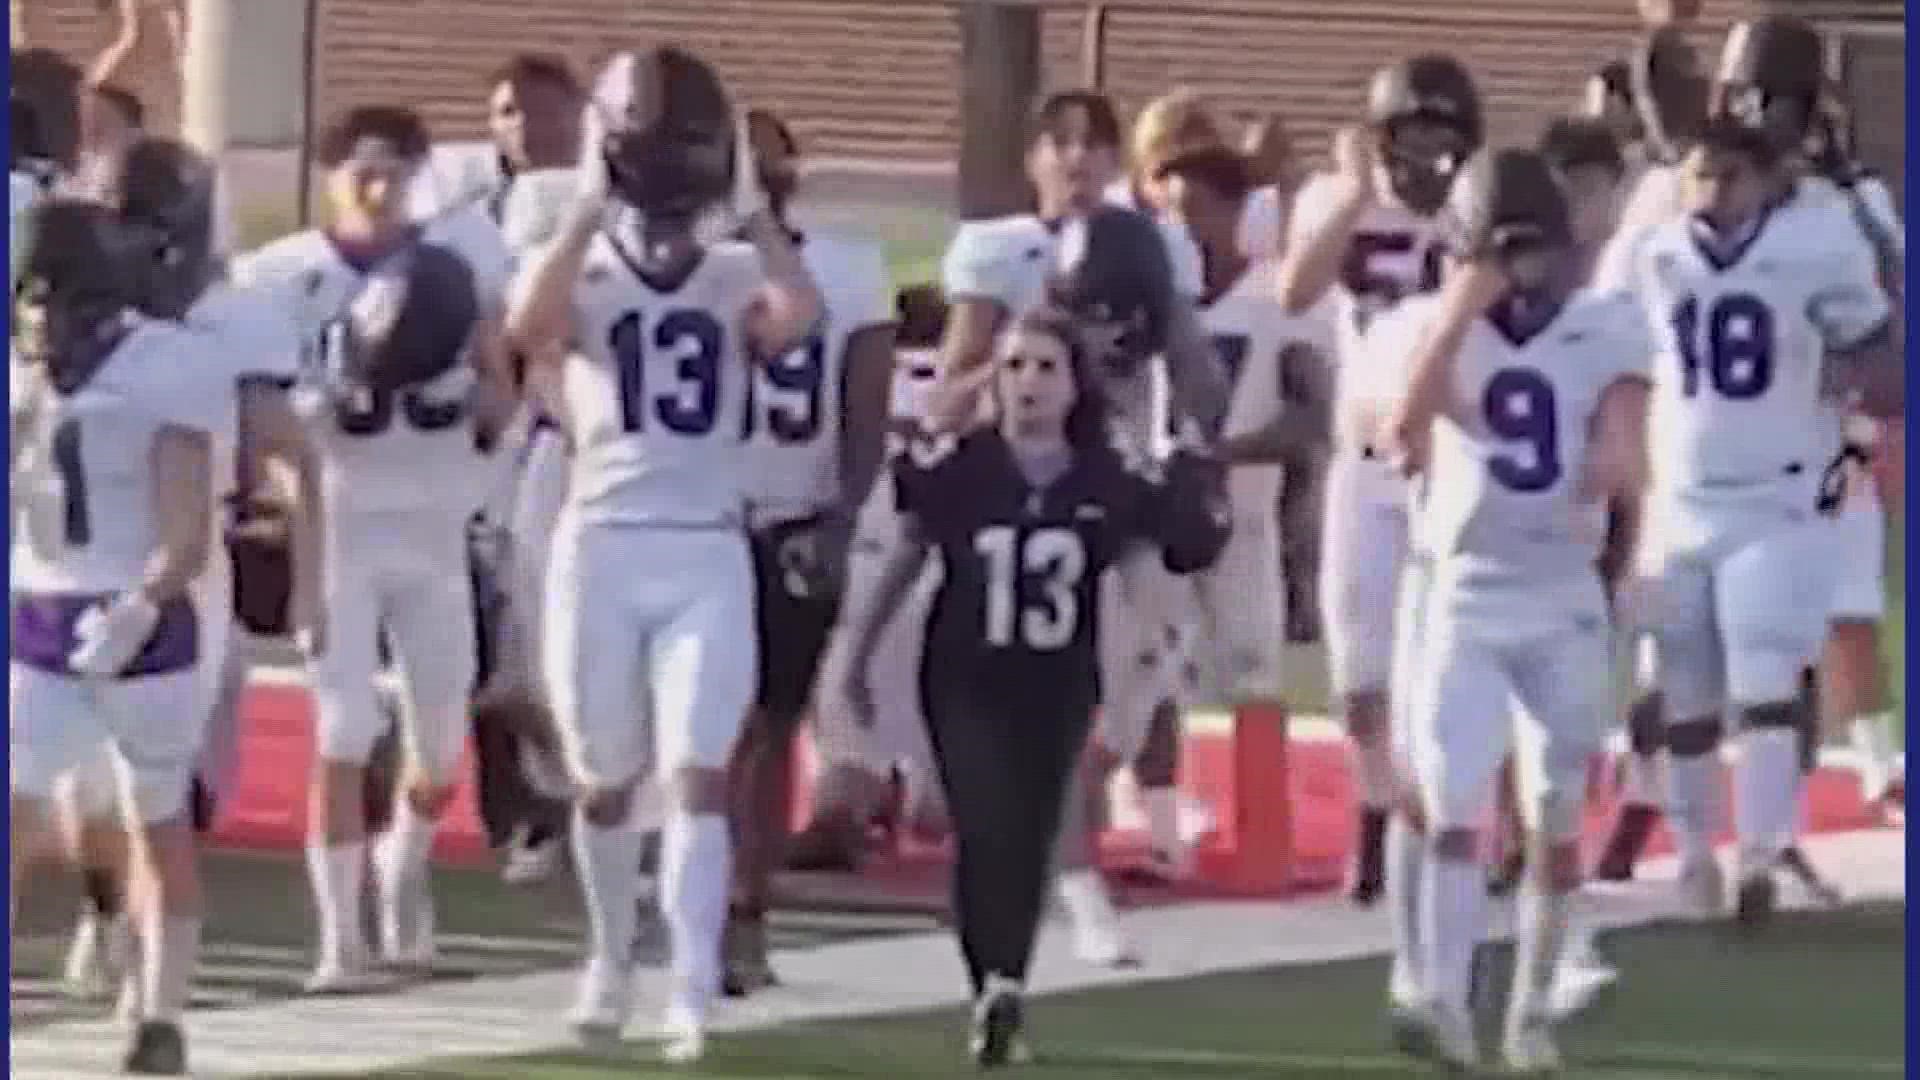 All she wanted was a chance to be on her high school's football team.